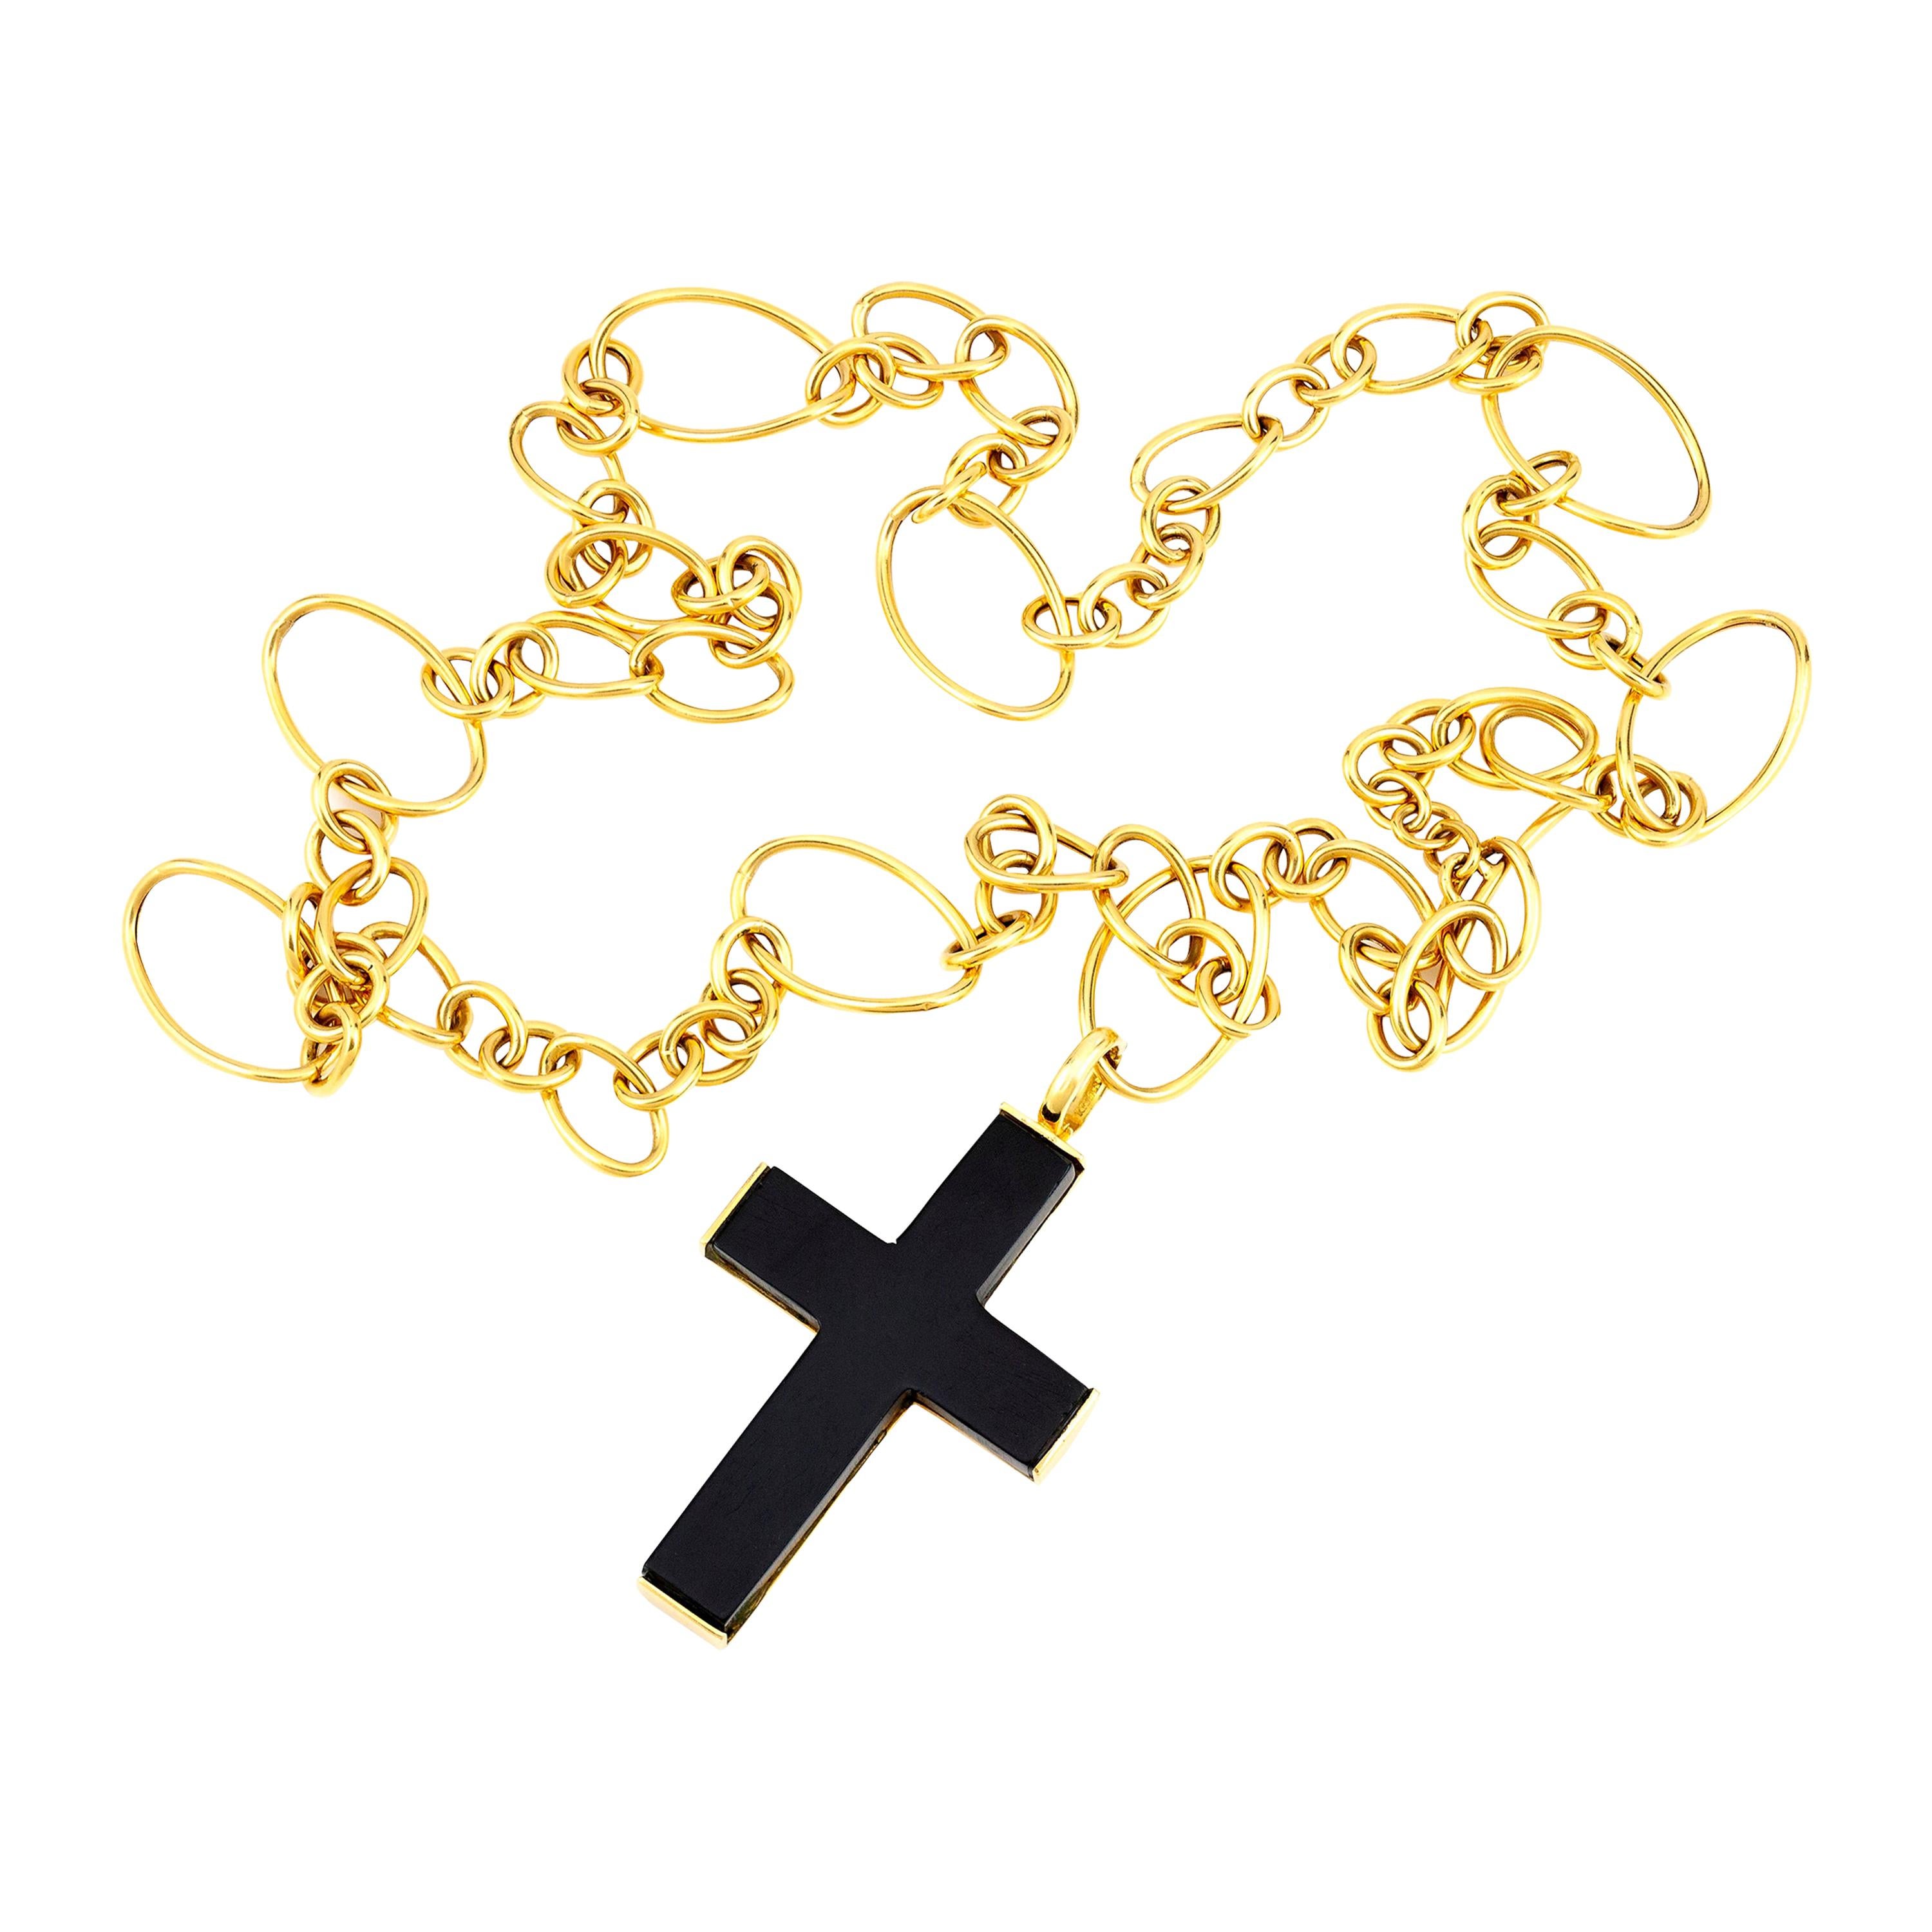 18 Karat Farone Manela Open Link Necklace with Cross Pendant with Black Onyx For Sale